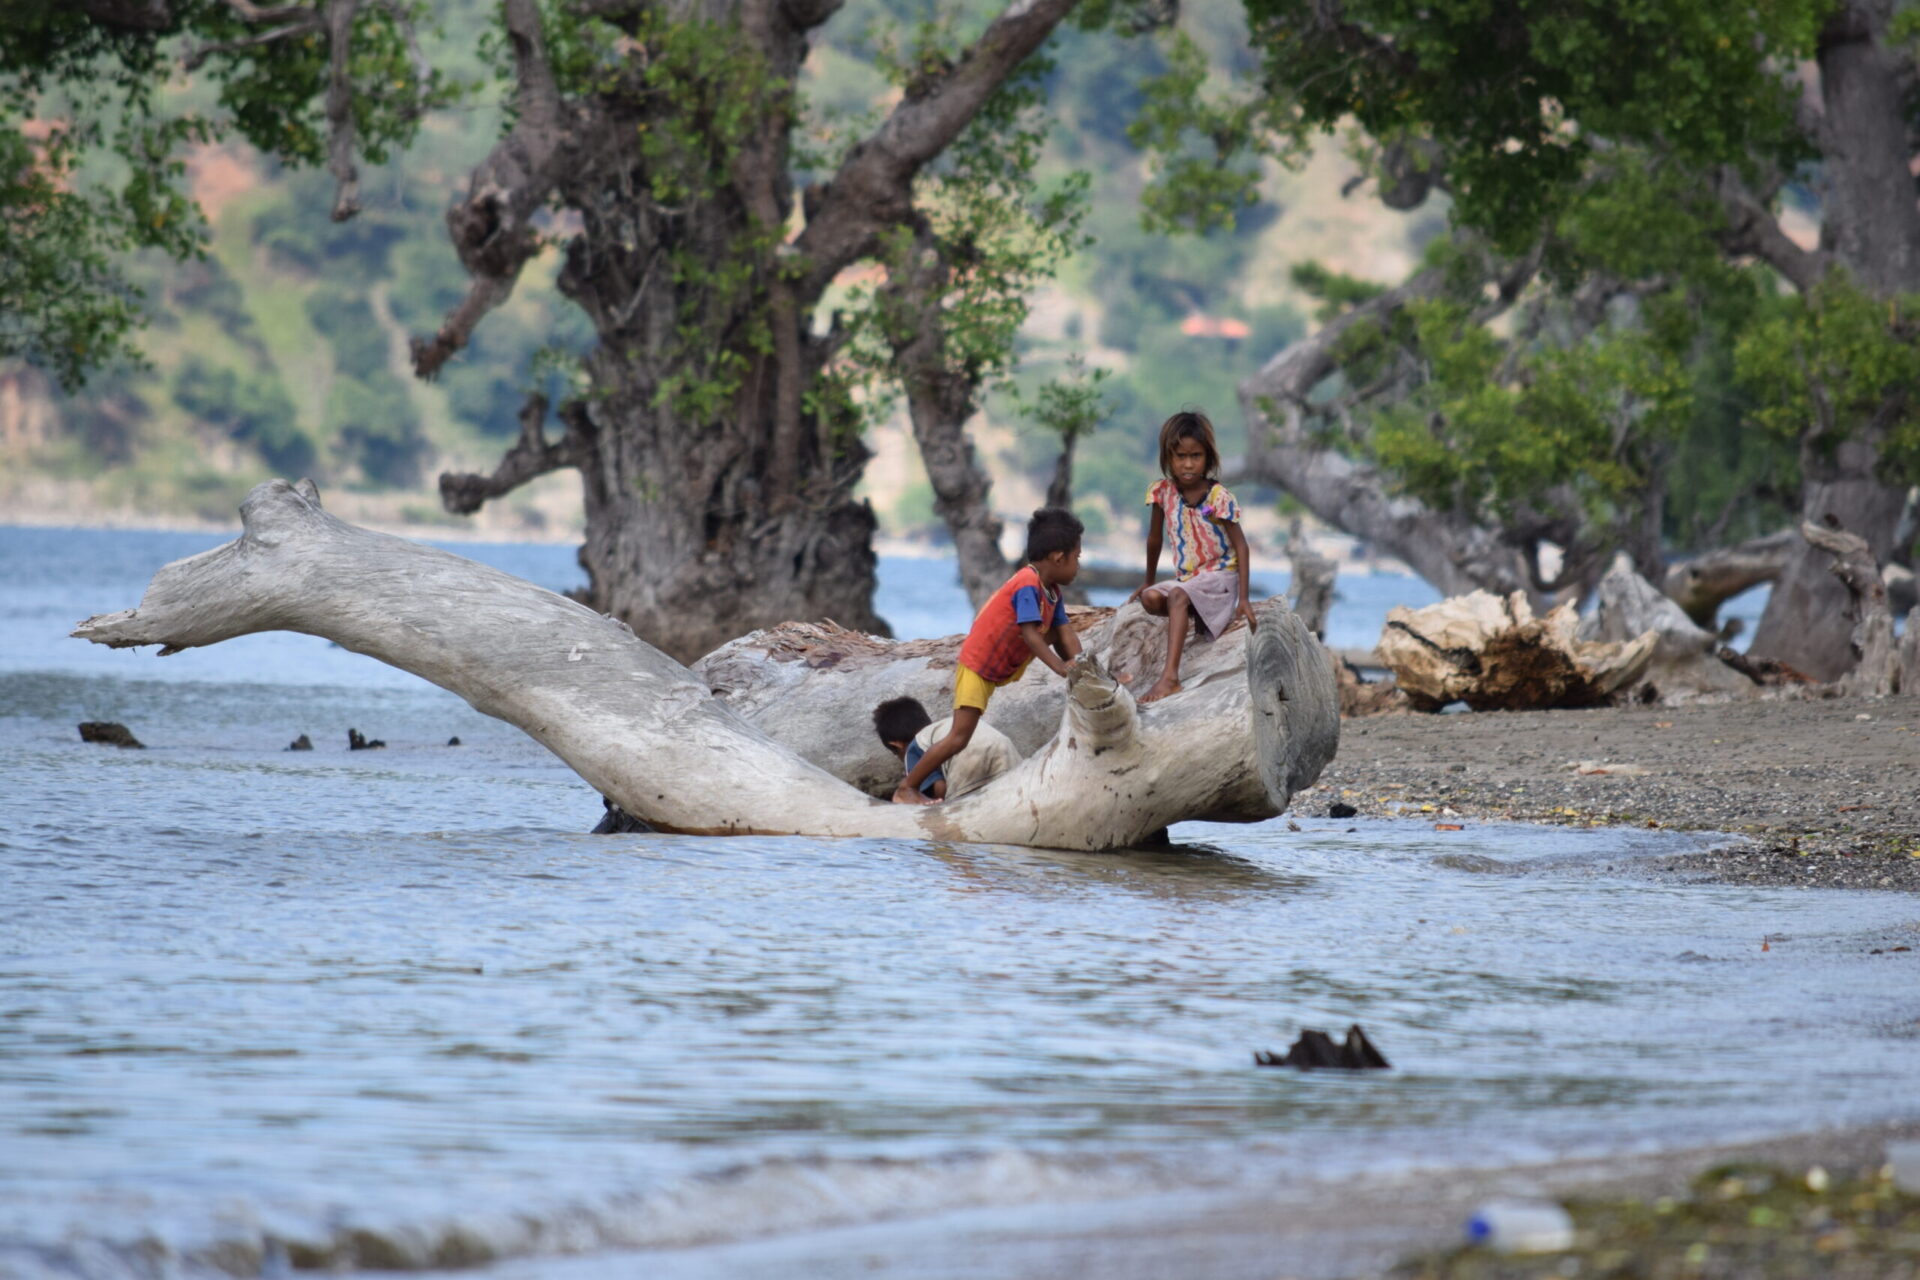 Children playing on mangrove stump in Tibar Bay, Timor Leste. Photo by USAID Adapt Asia-Pacific